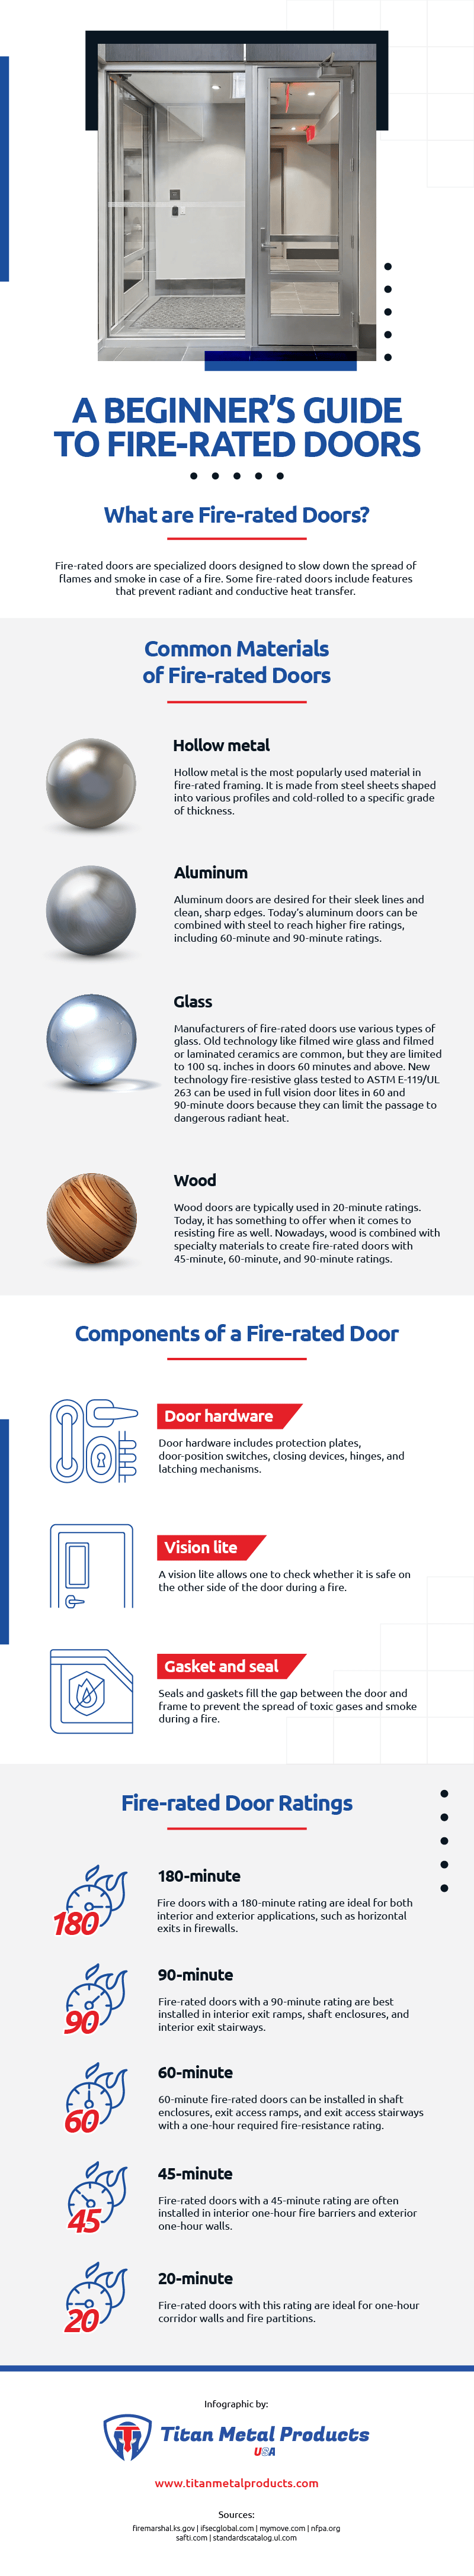 A Beginner’s Guide to Fire-rated Doors